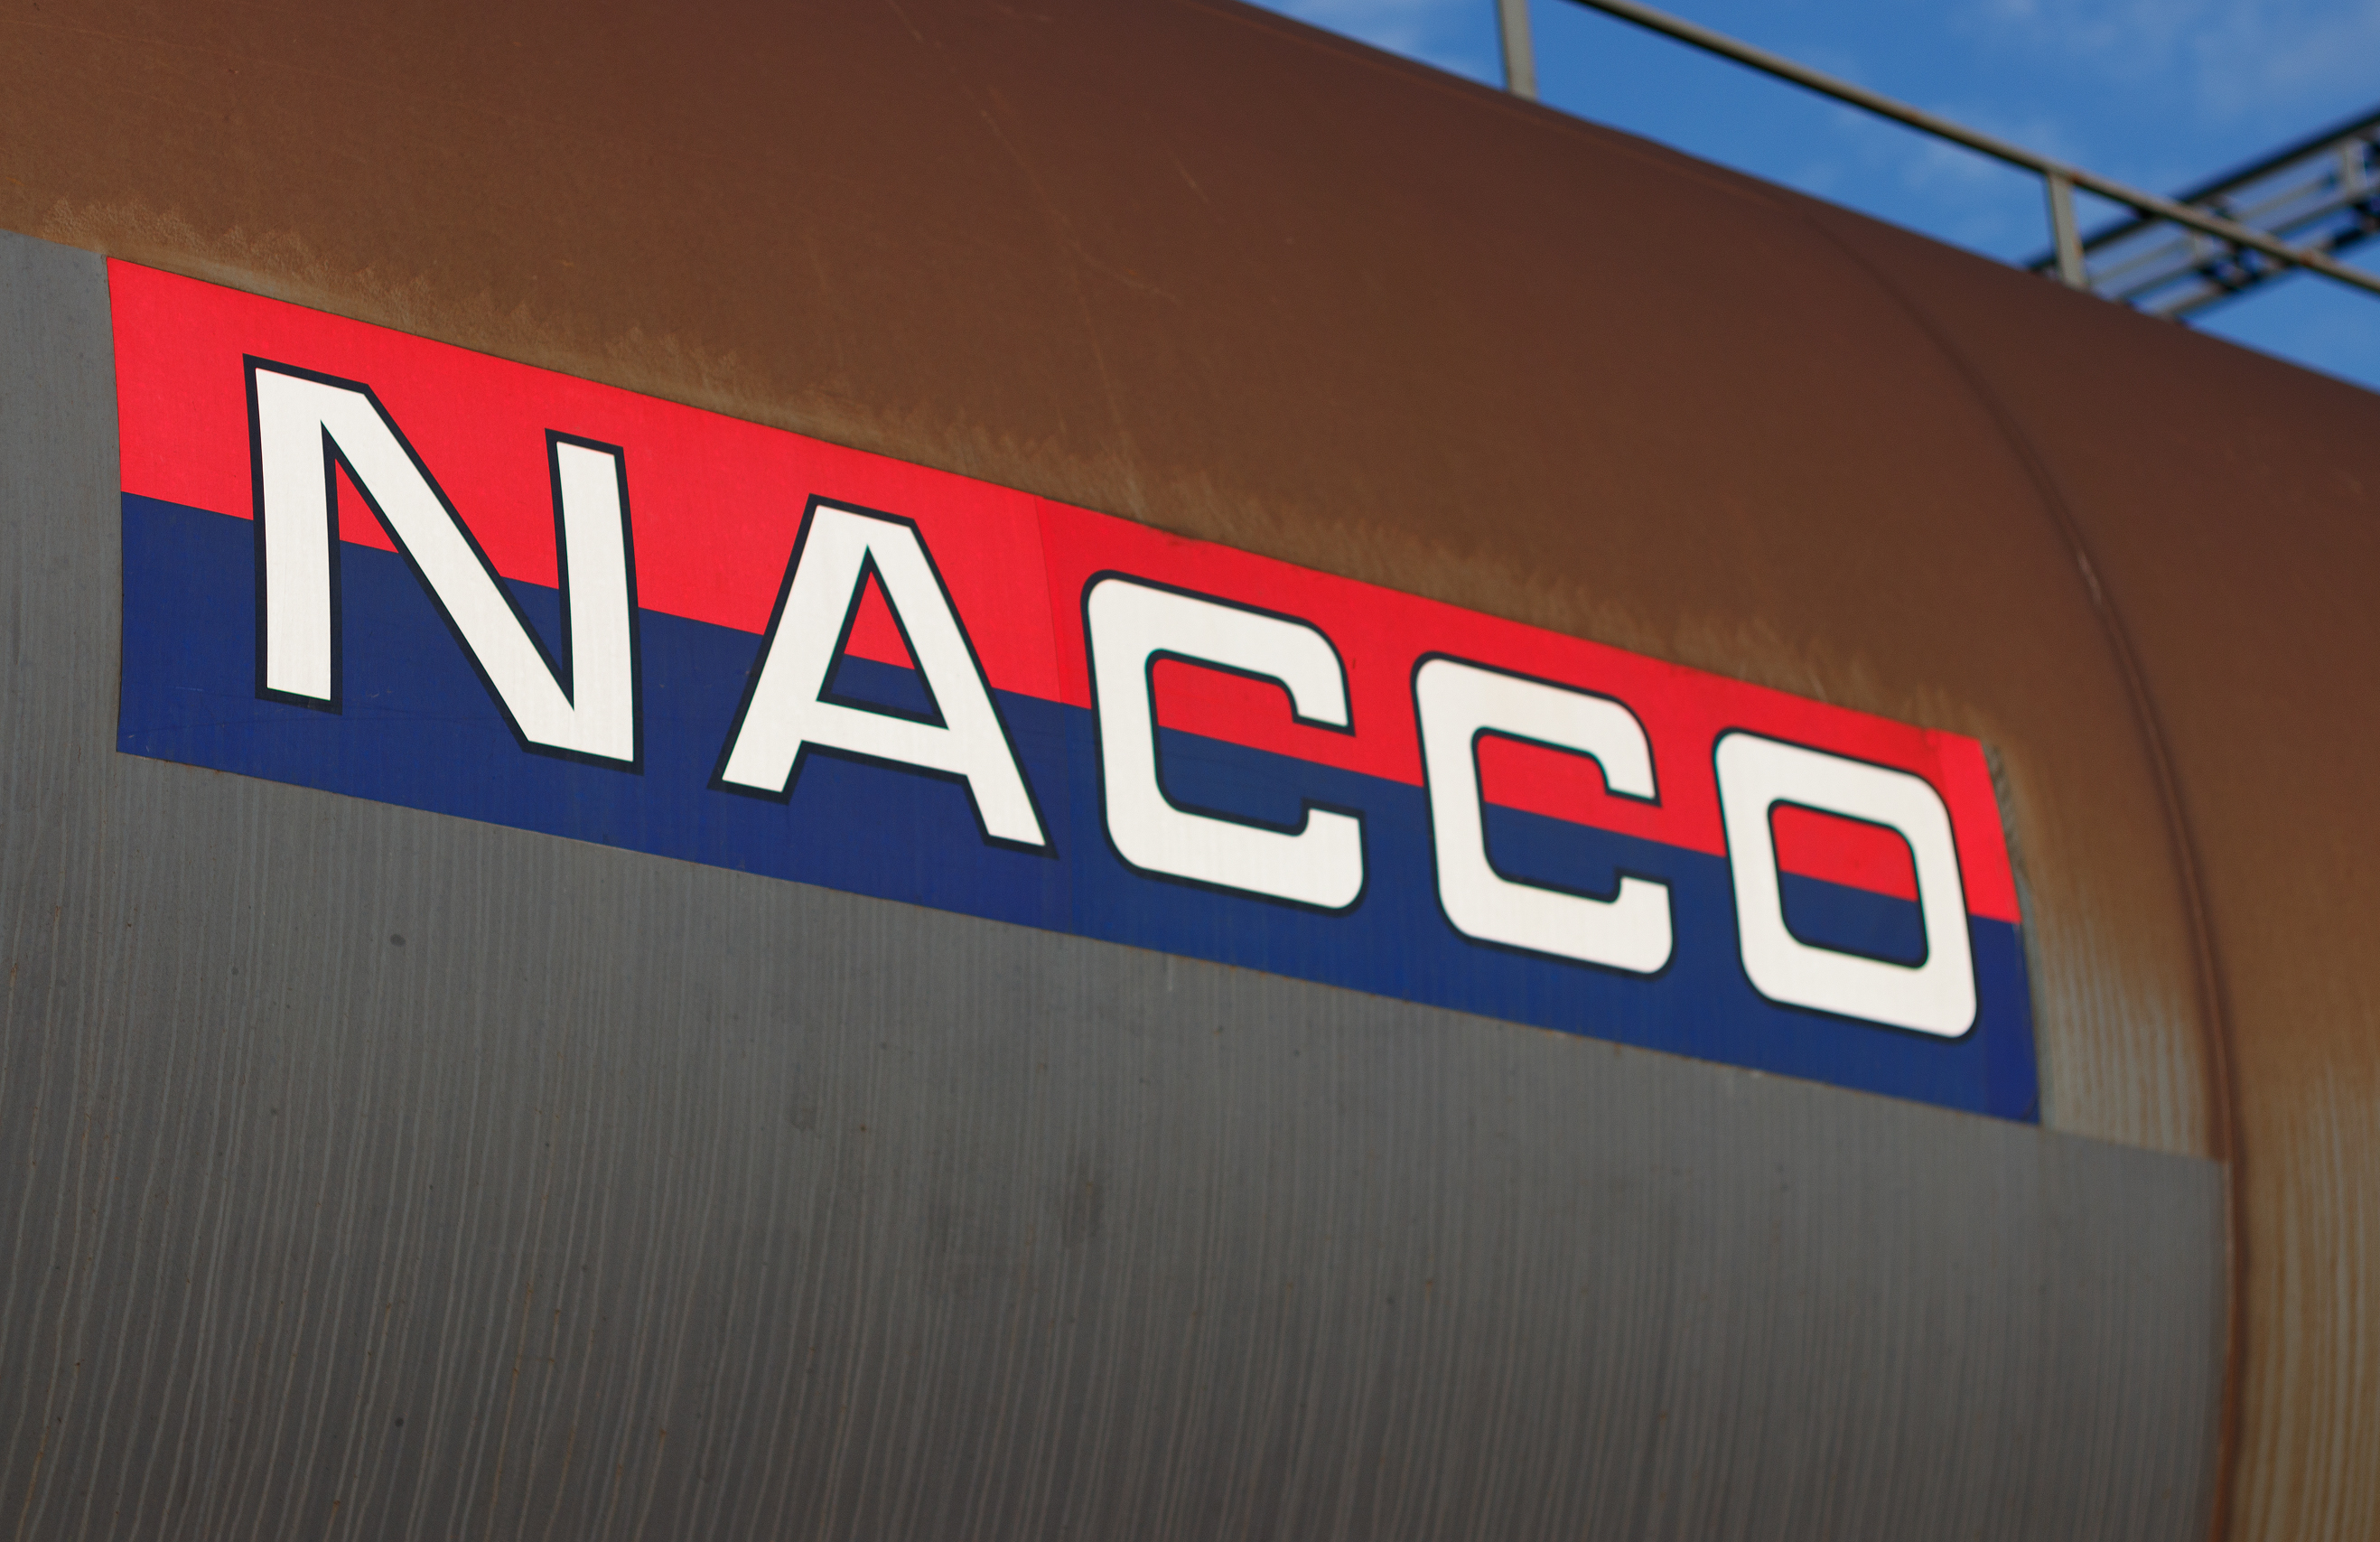 Wascosa acquires about 4,400 freight wagons from NACCO/CIT